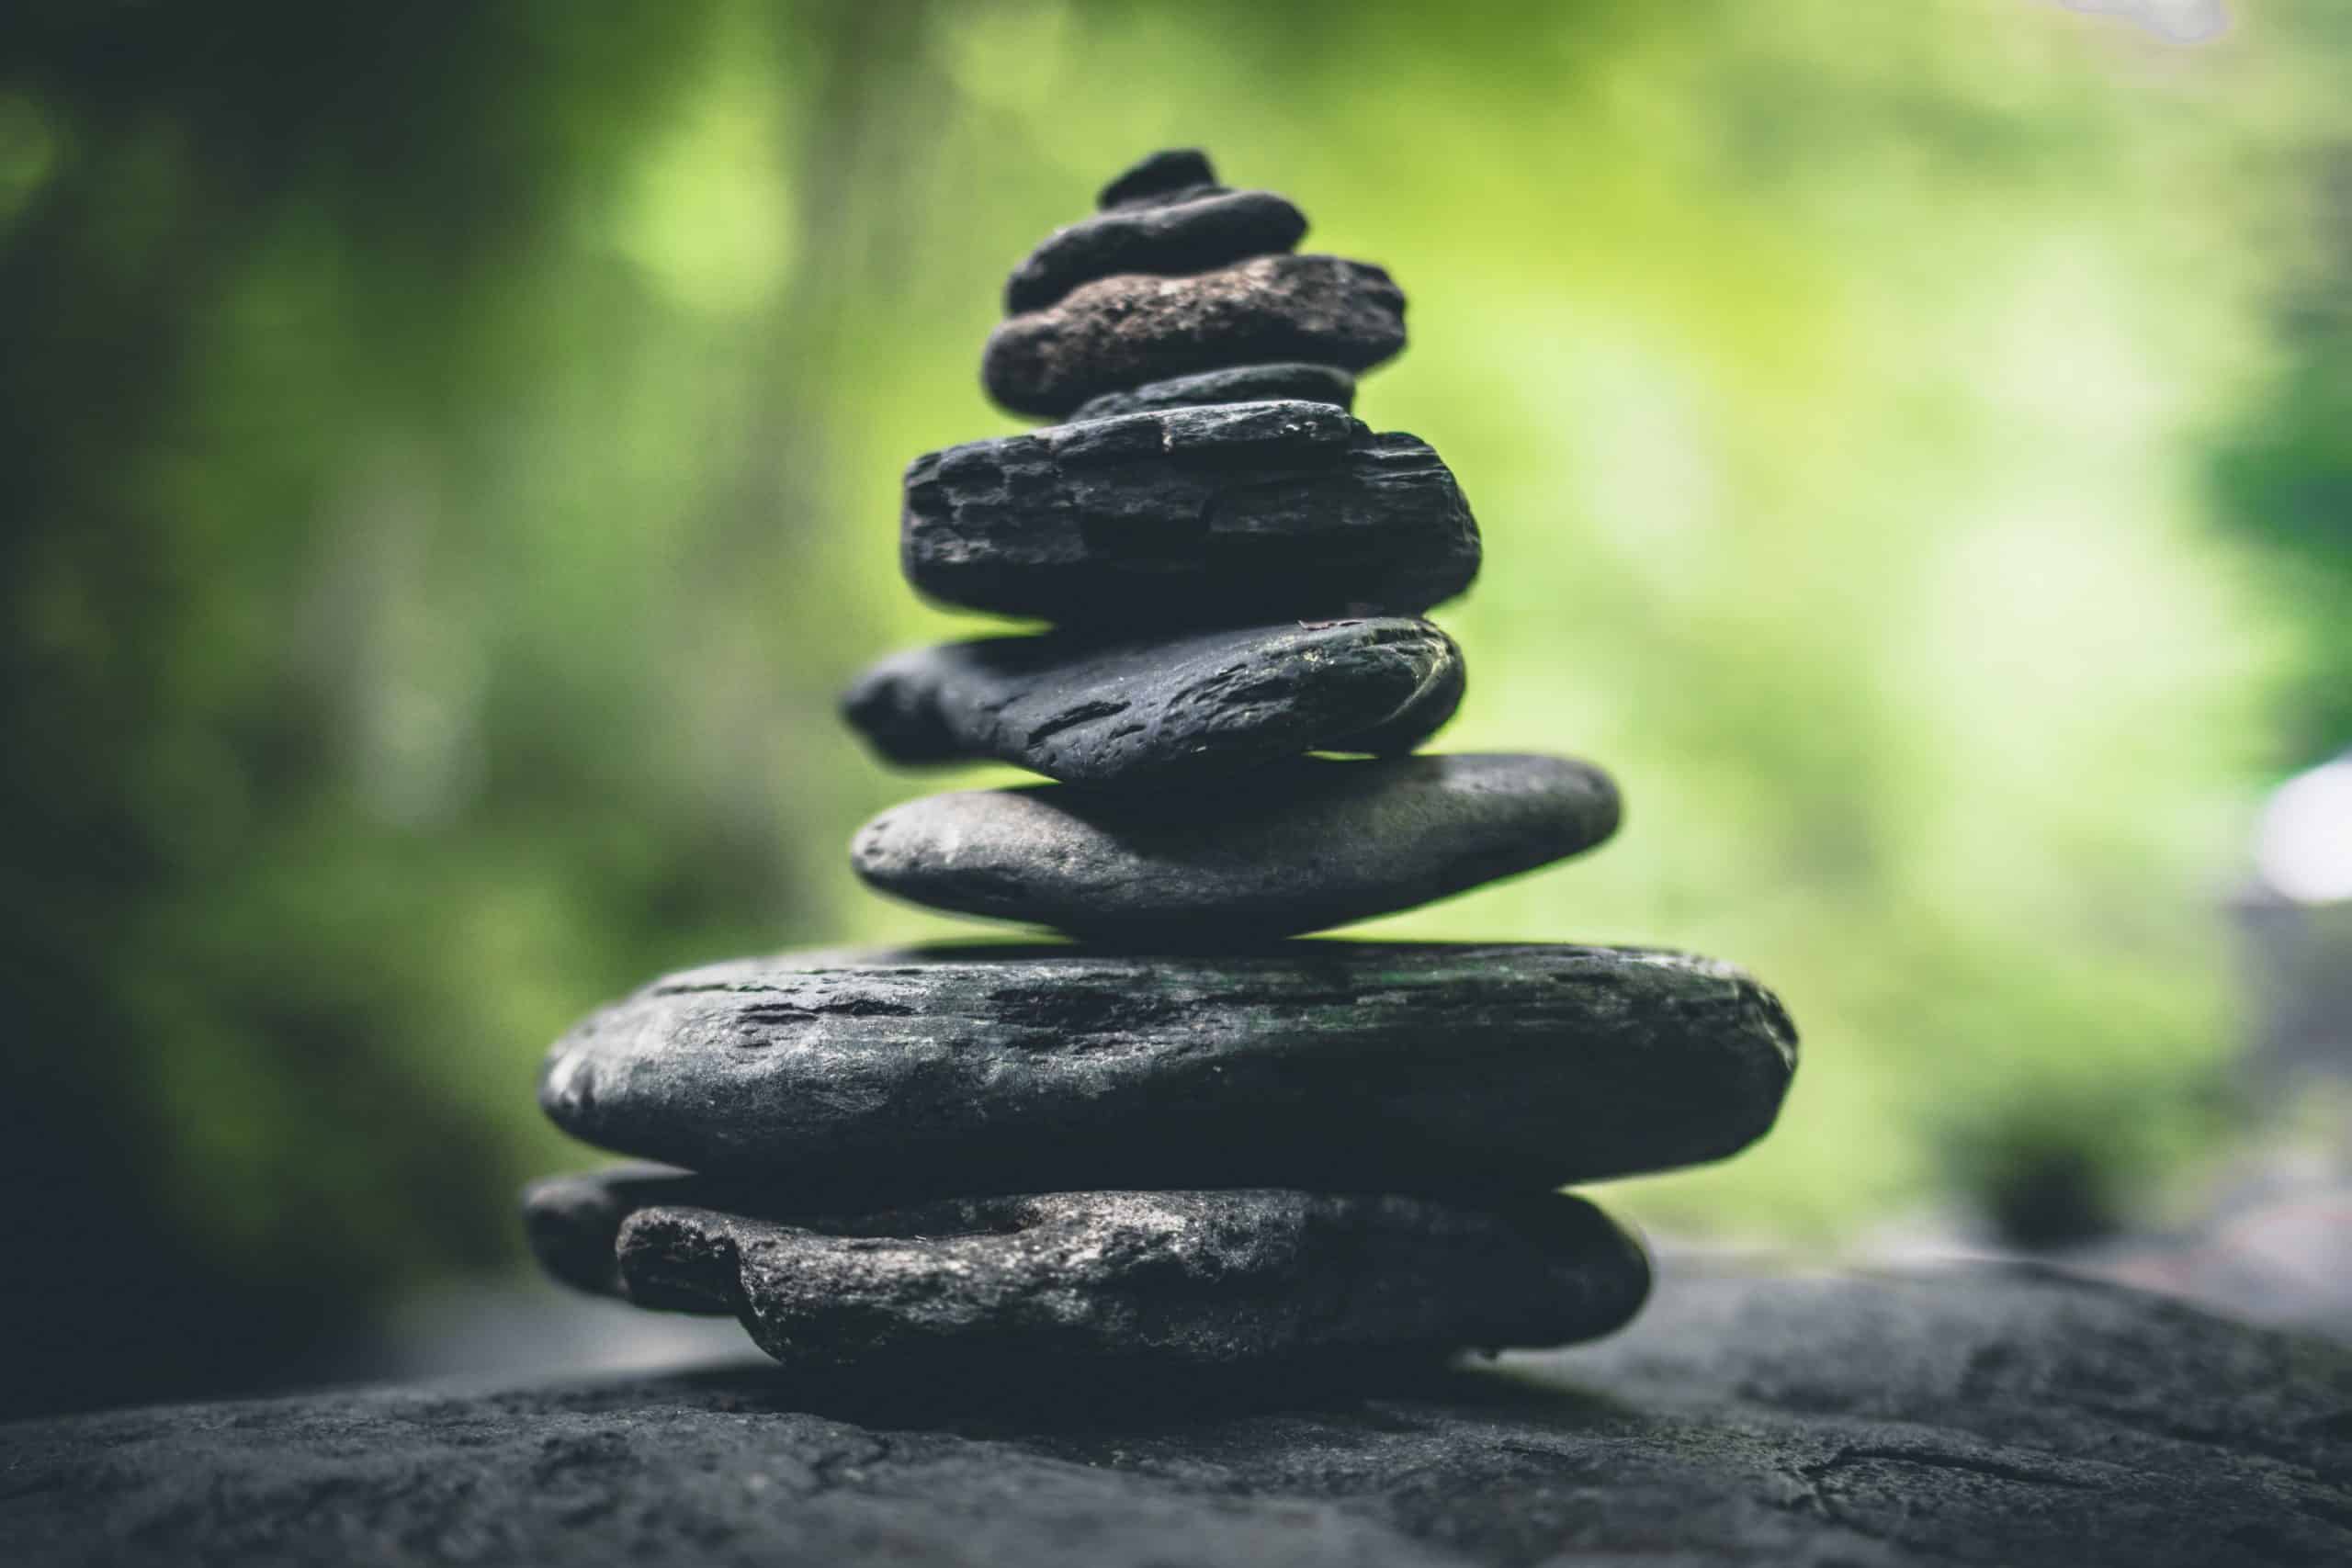 Image of stones stacked in a forest